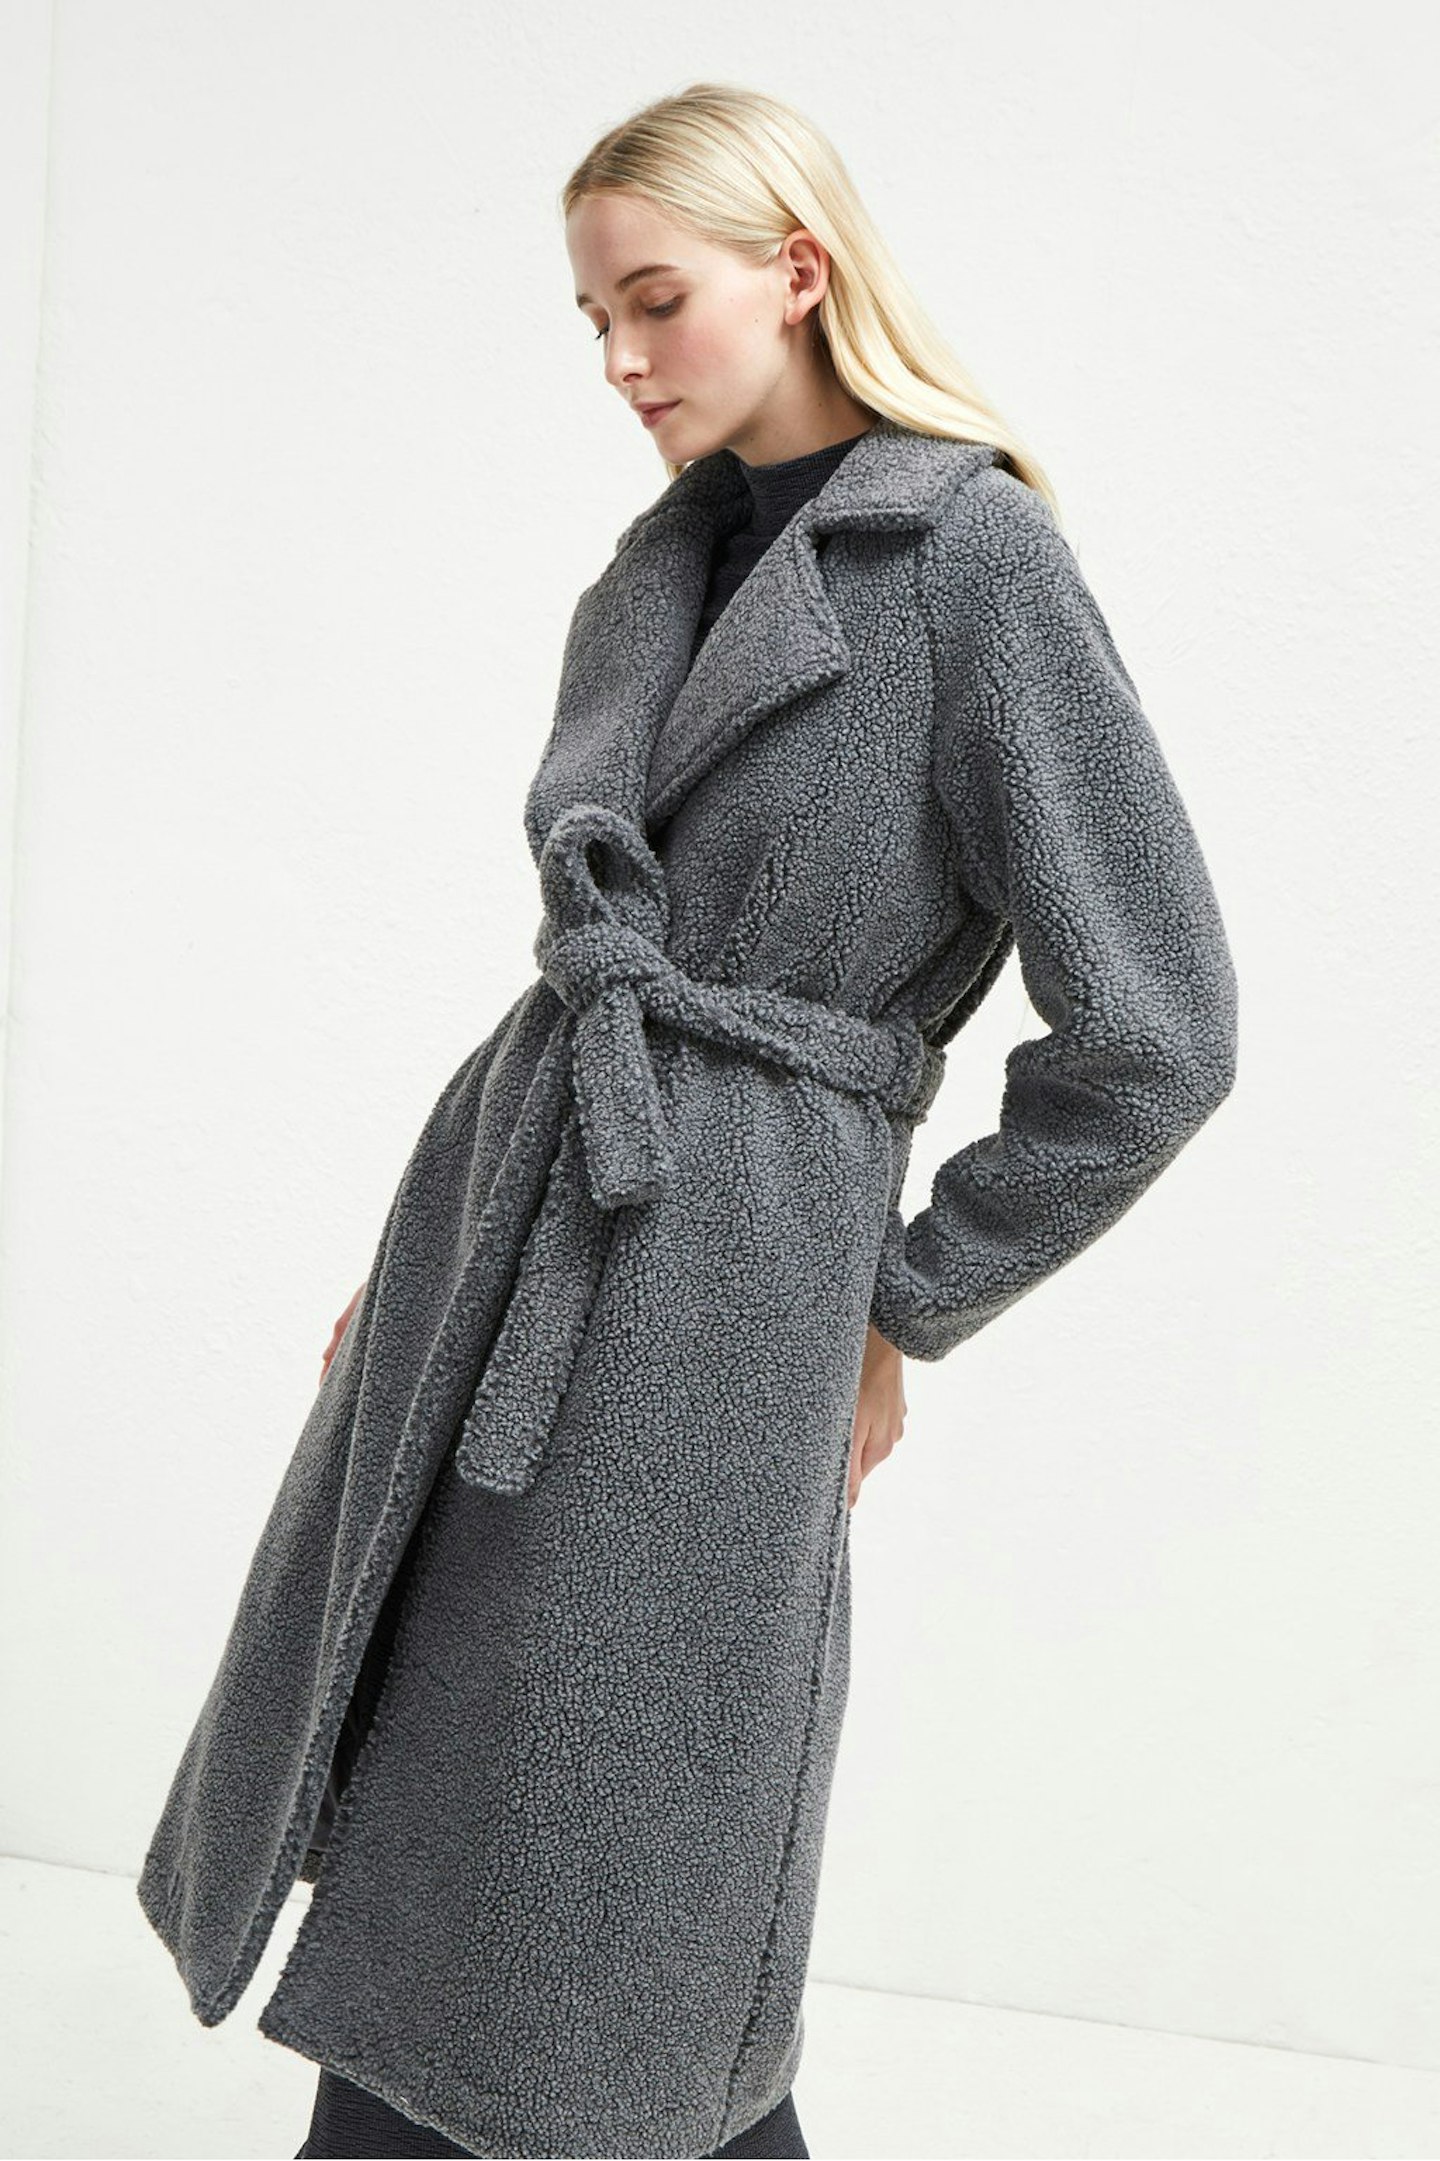 French Connection,  Arabella Faux Shearling Coat, £190